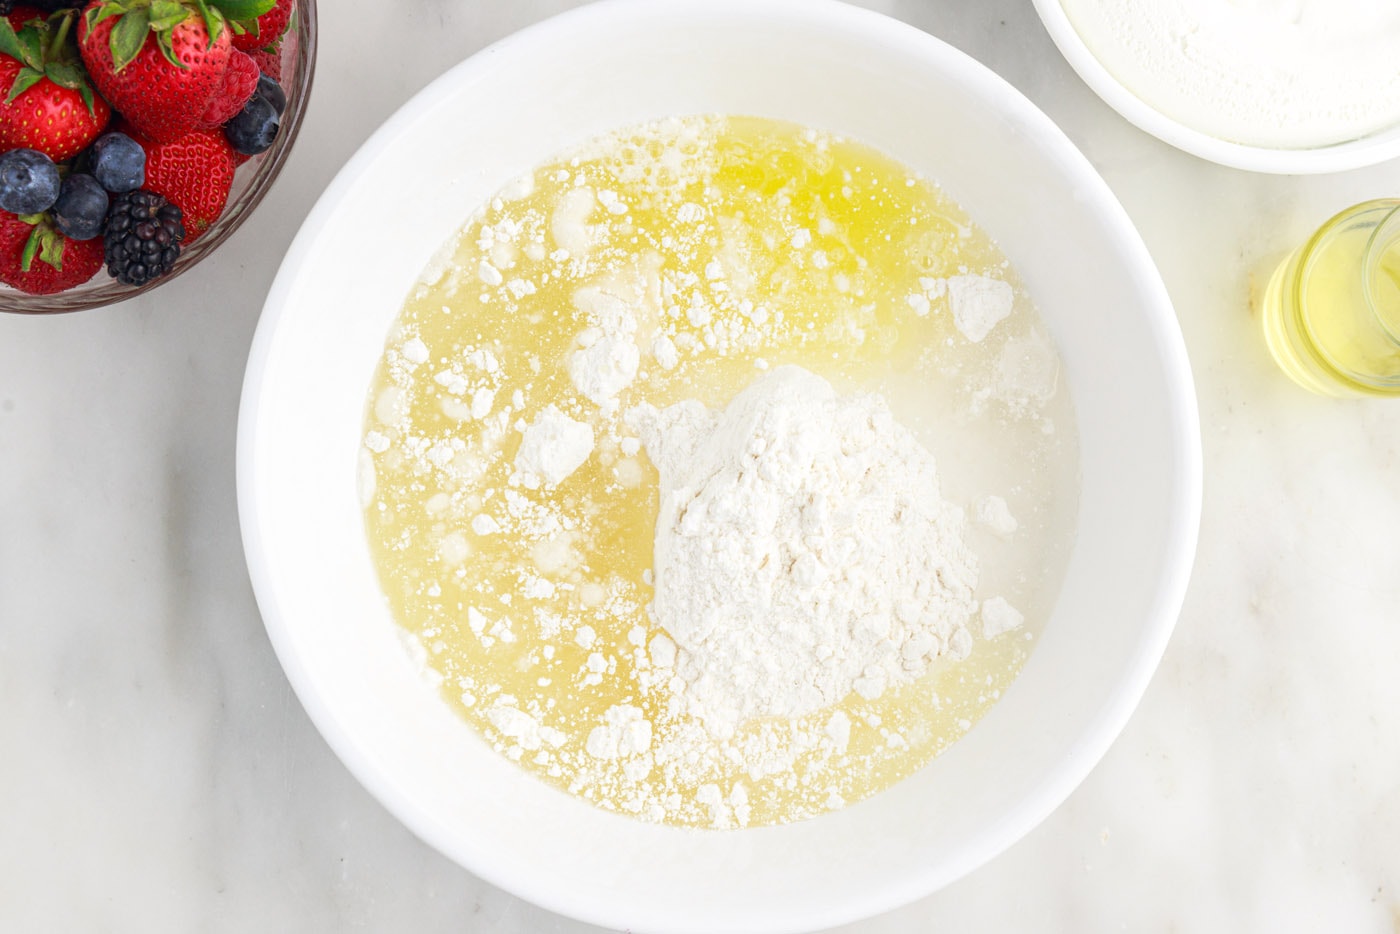 cake mix, oil, and egg whites in a bowl